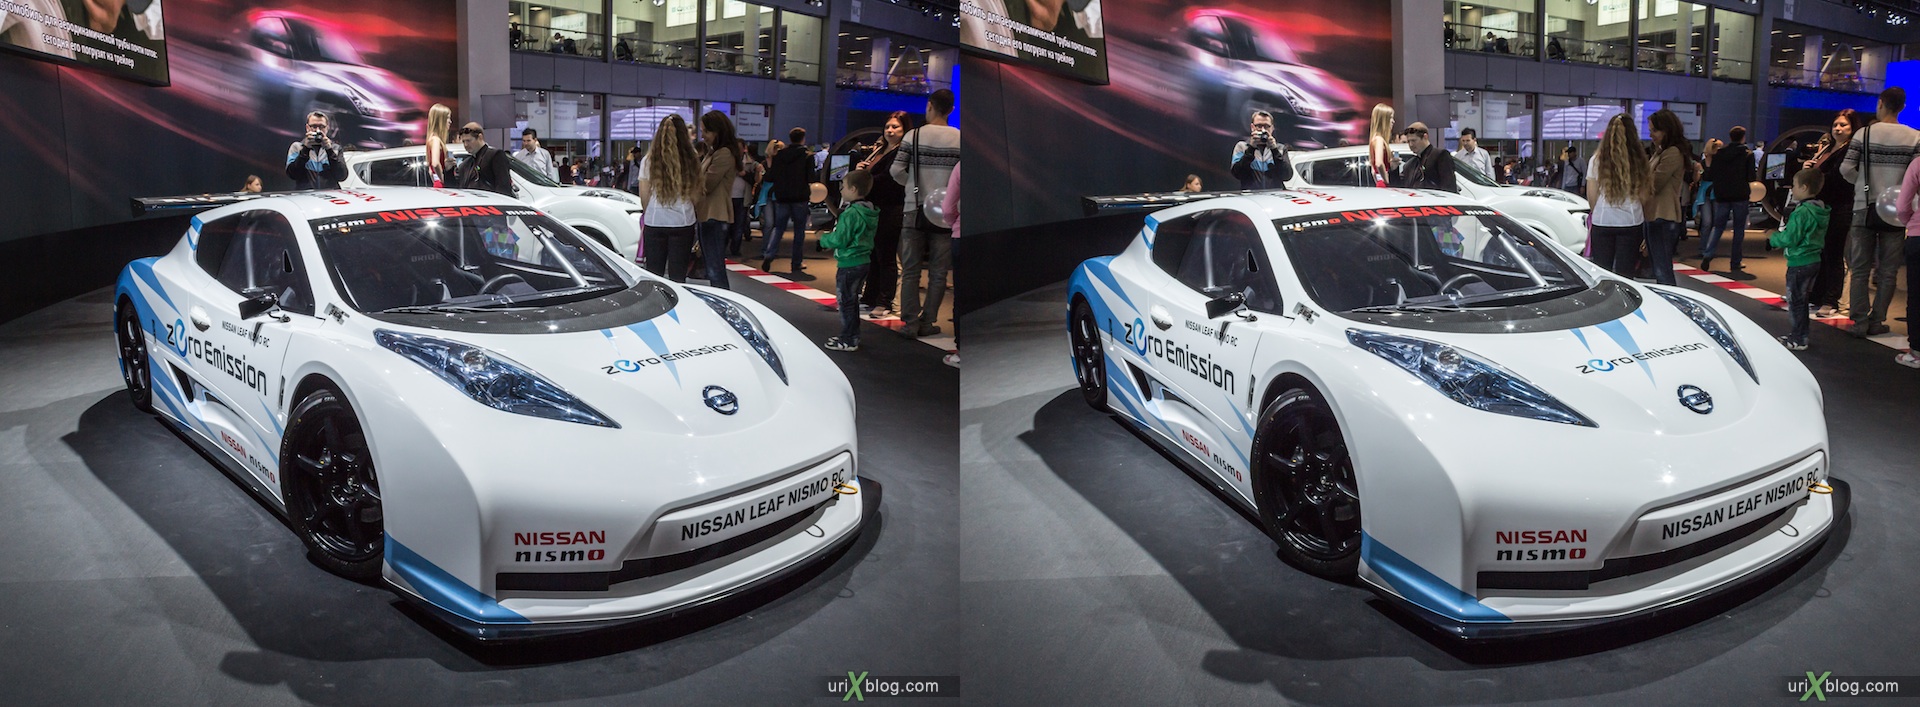 2012, Nissan Leaf Nismo RC, Moscow International Automobile Salon, auto show, 3D, stereo pair, cross-eyed, crossview